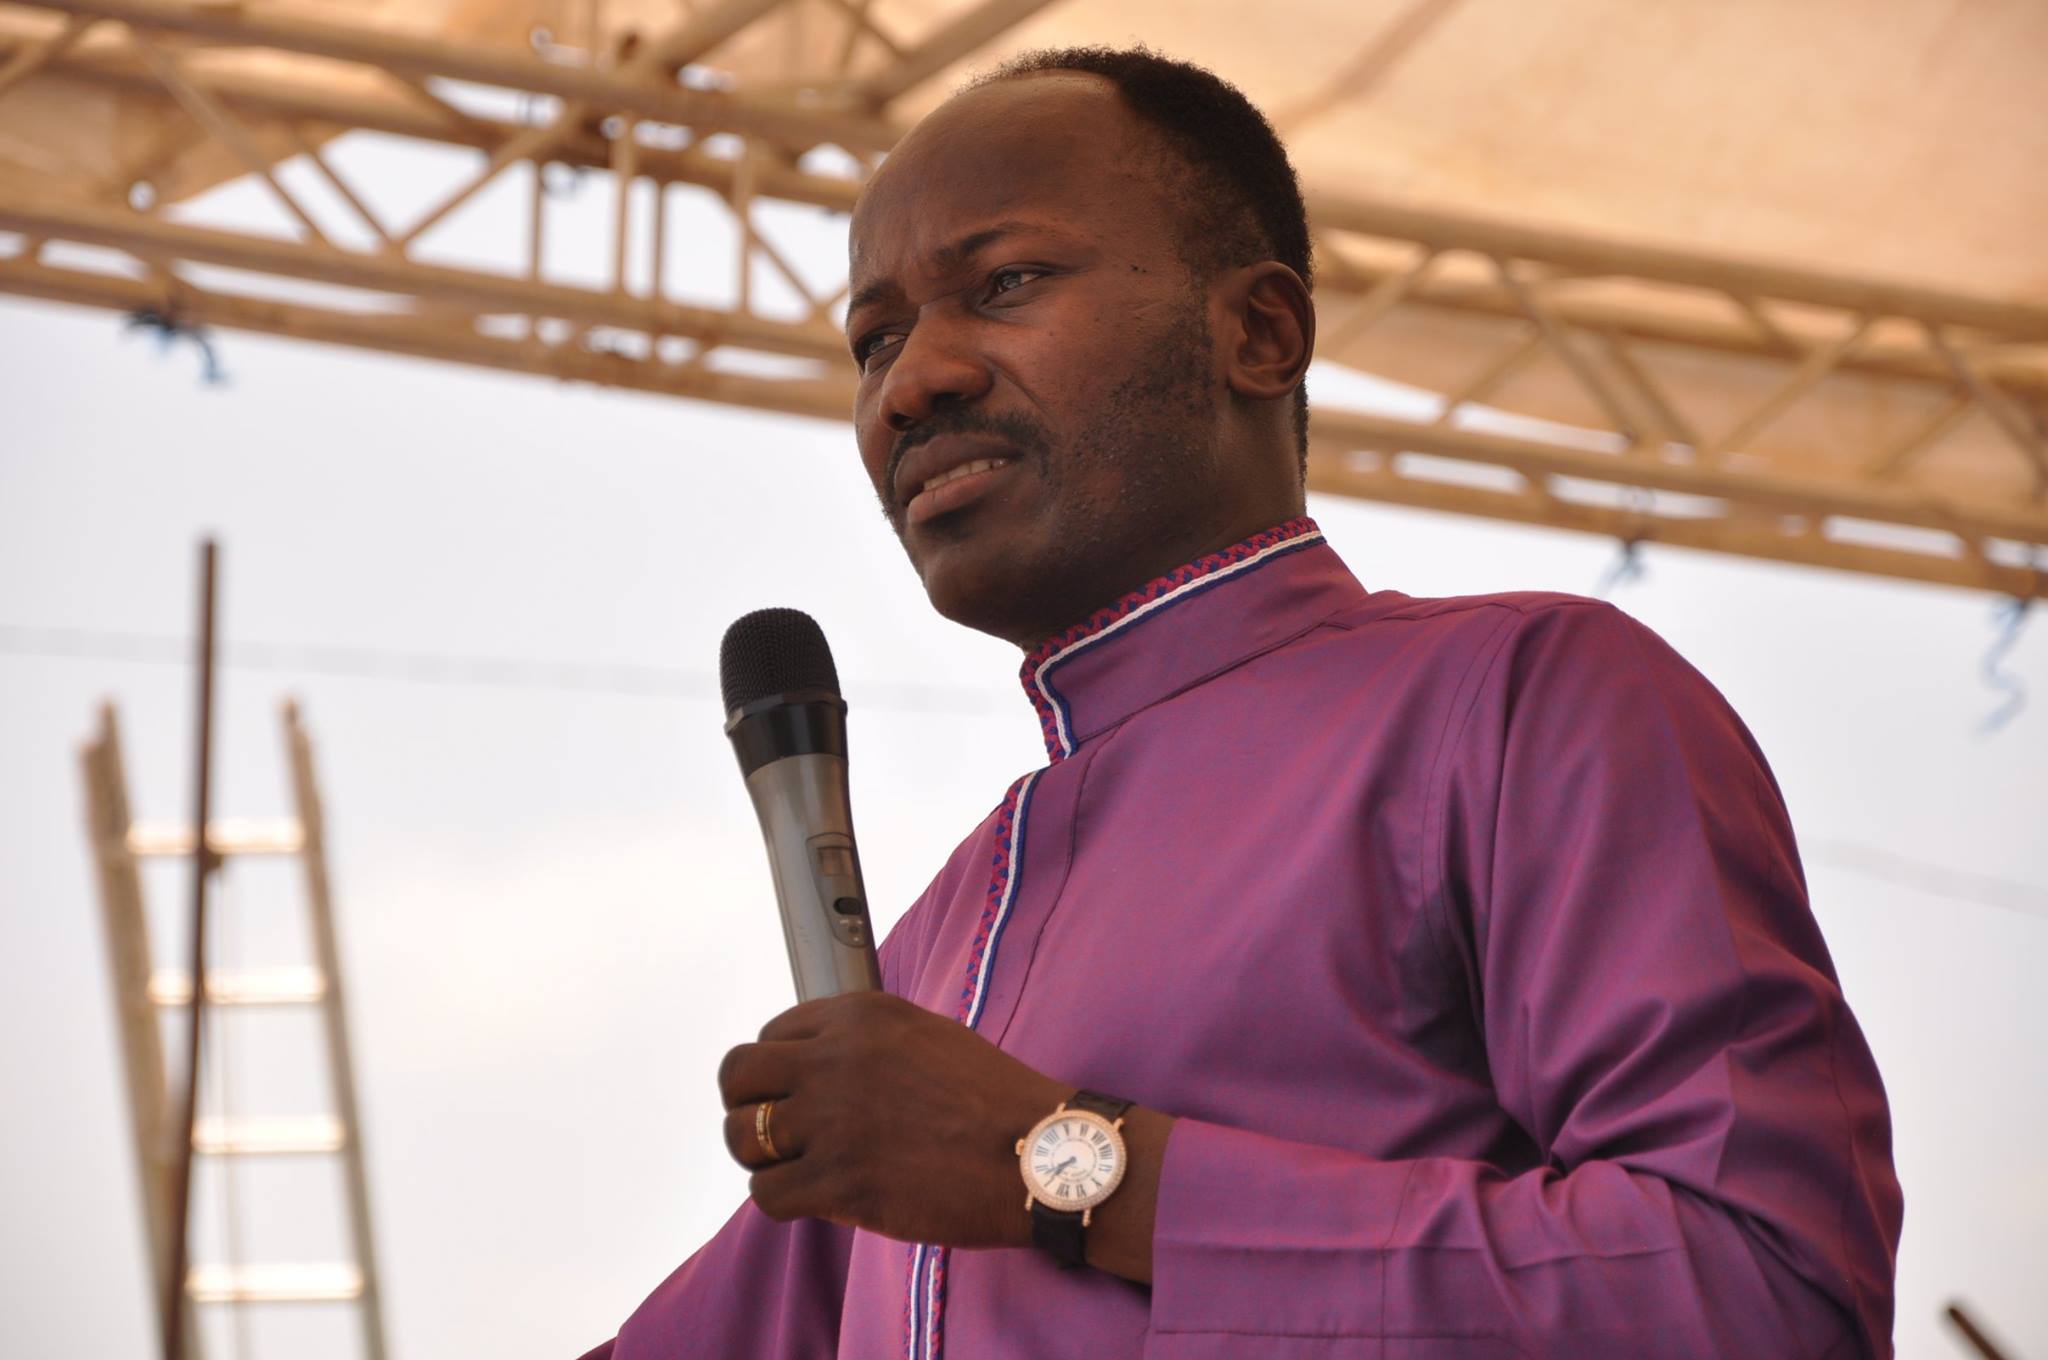 Christian Youth Apostle Johnson Suleman, general overseer of Omega Fire MInistries